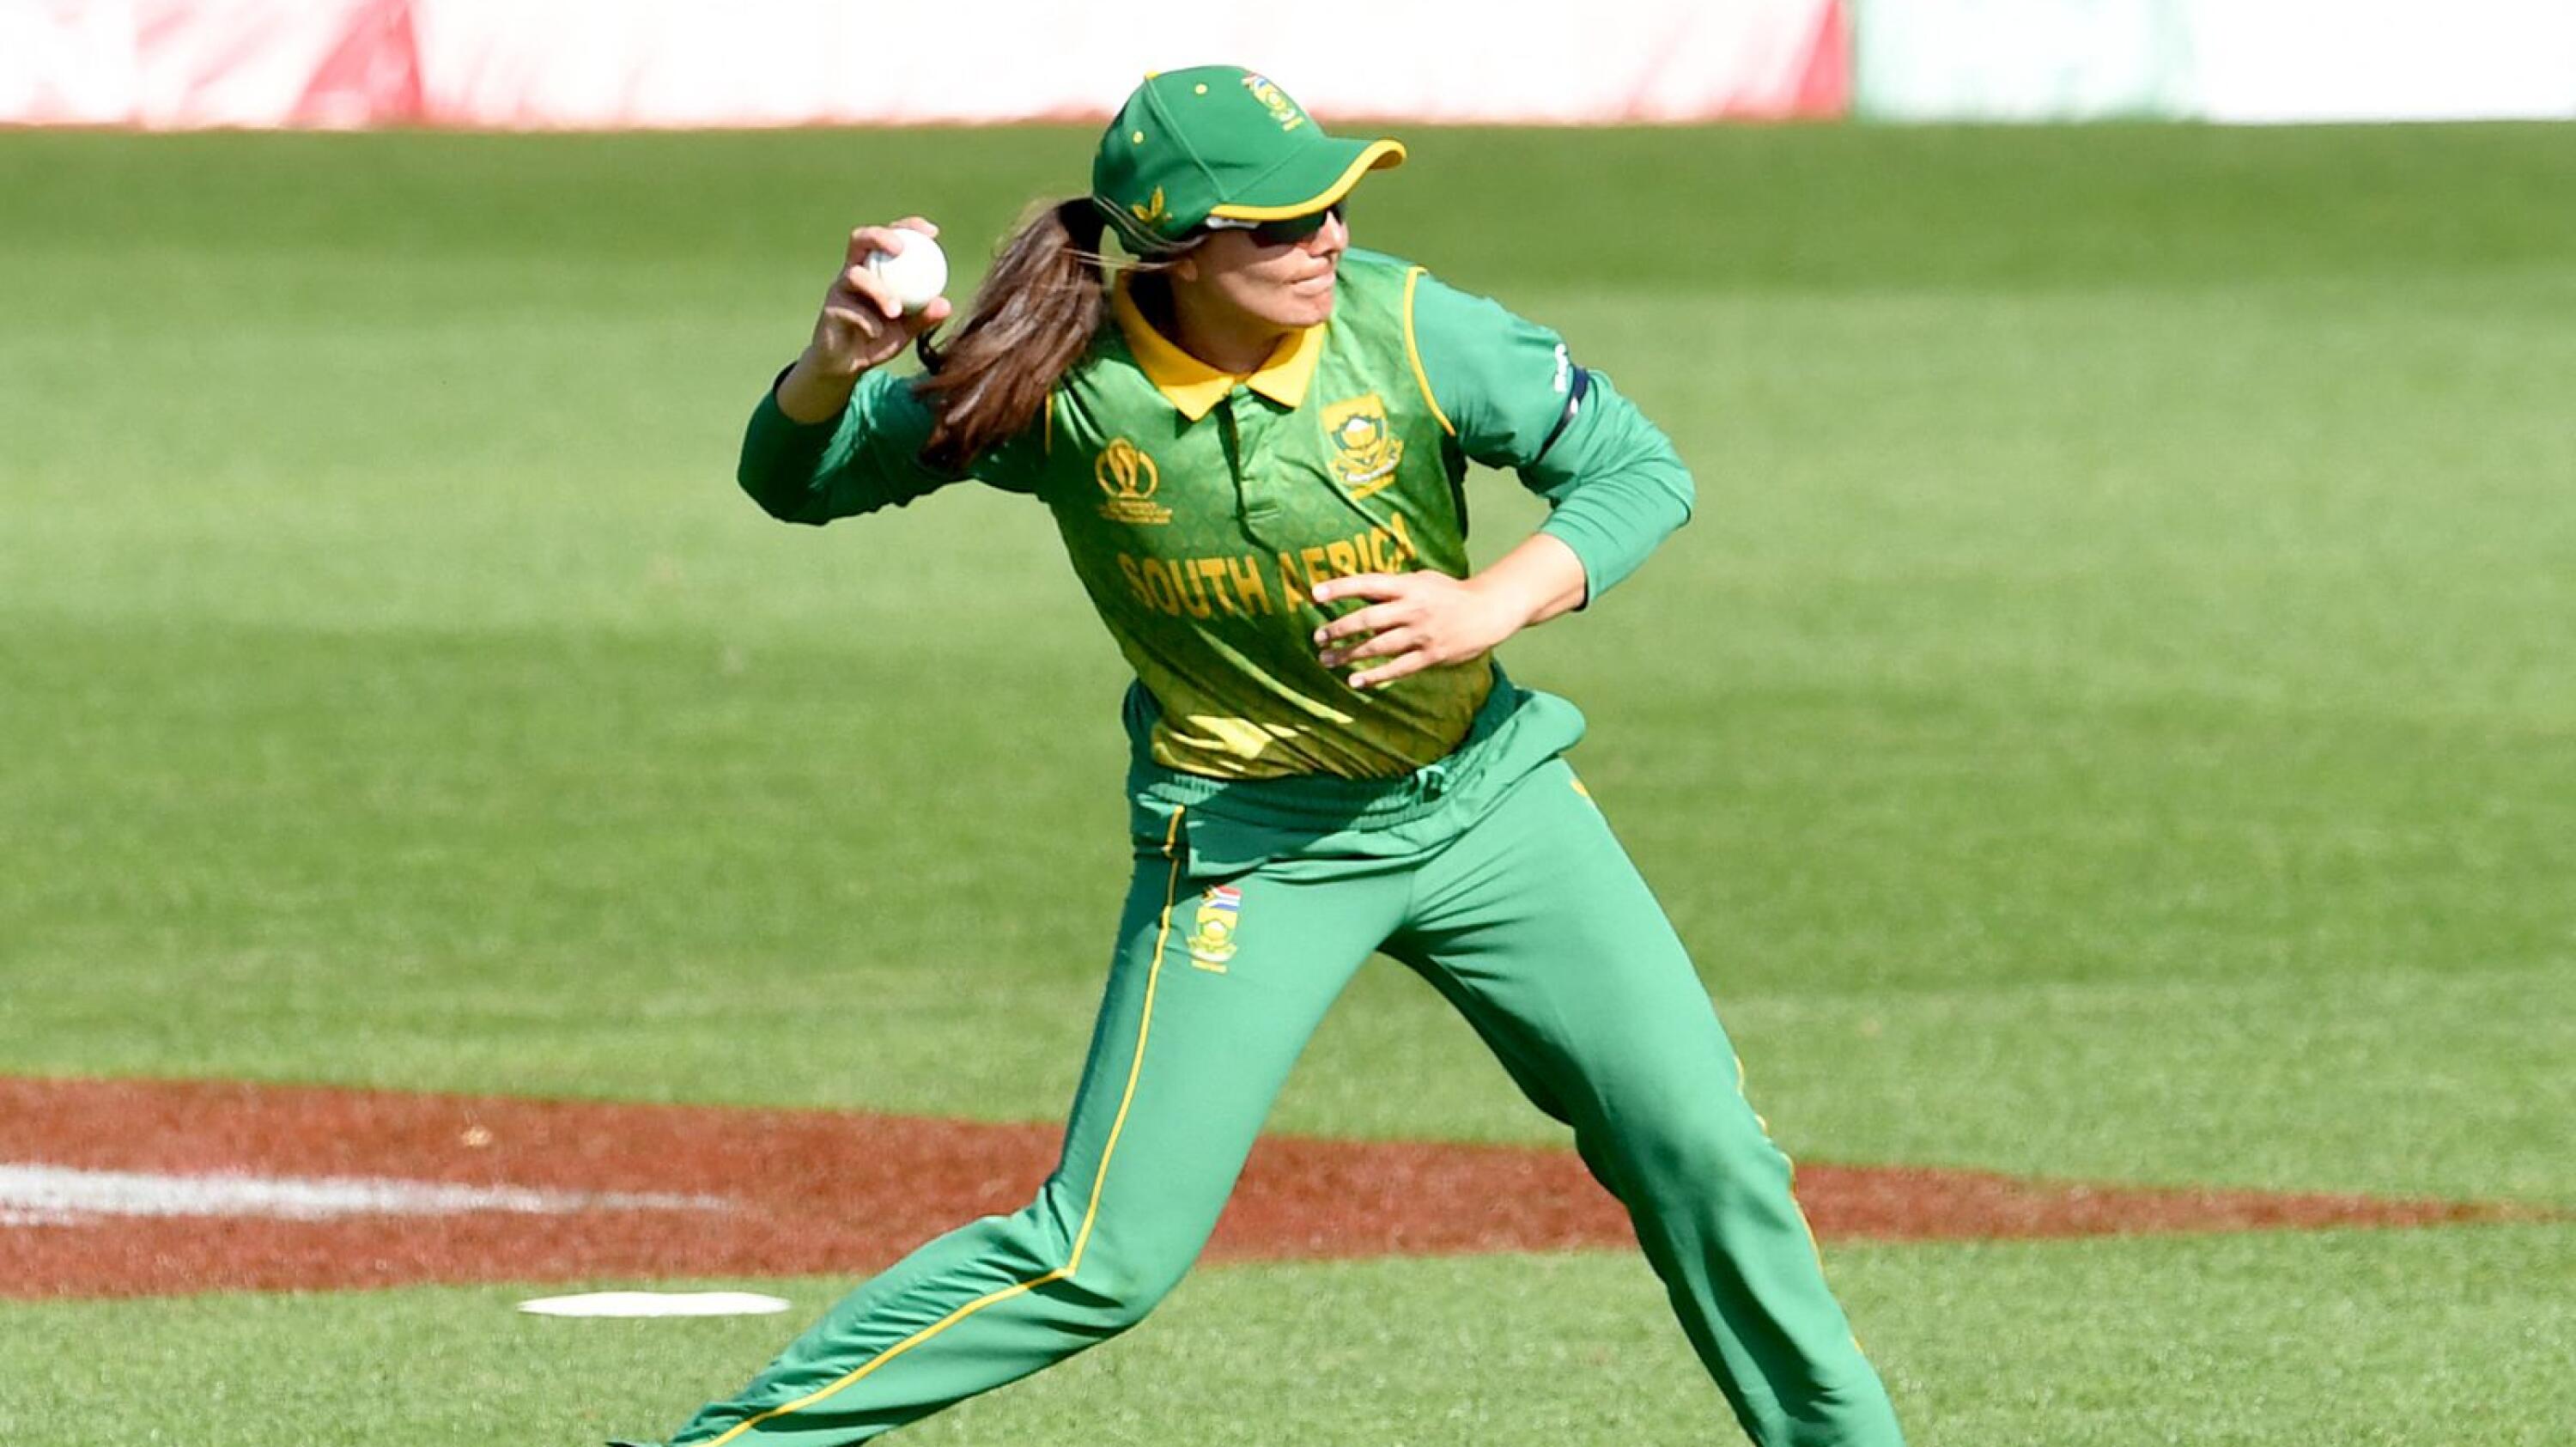 South Africa's Sune Luus throws the ball during their Round 1 Women's Cricket World Cup match against Bangladesh at University Oval in Dunedin on March 5, 2022